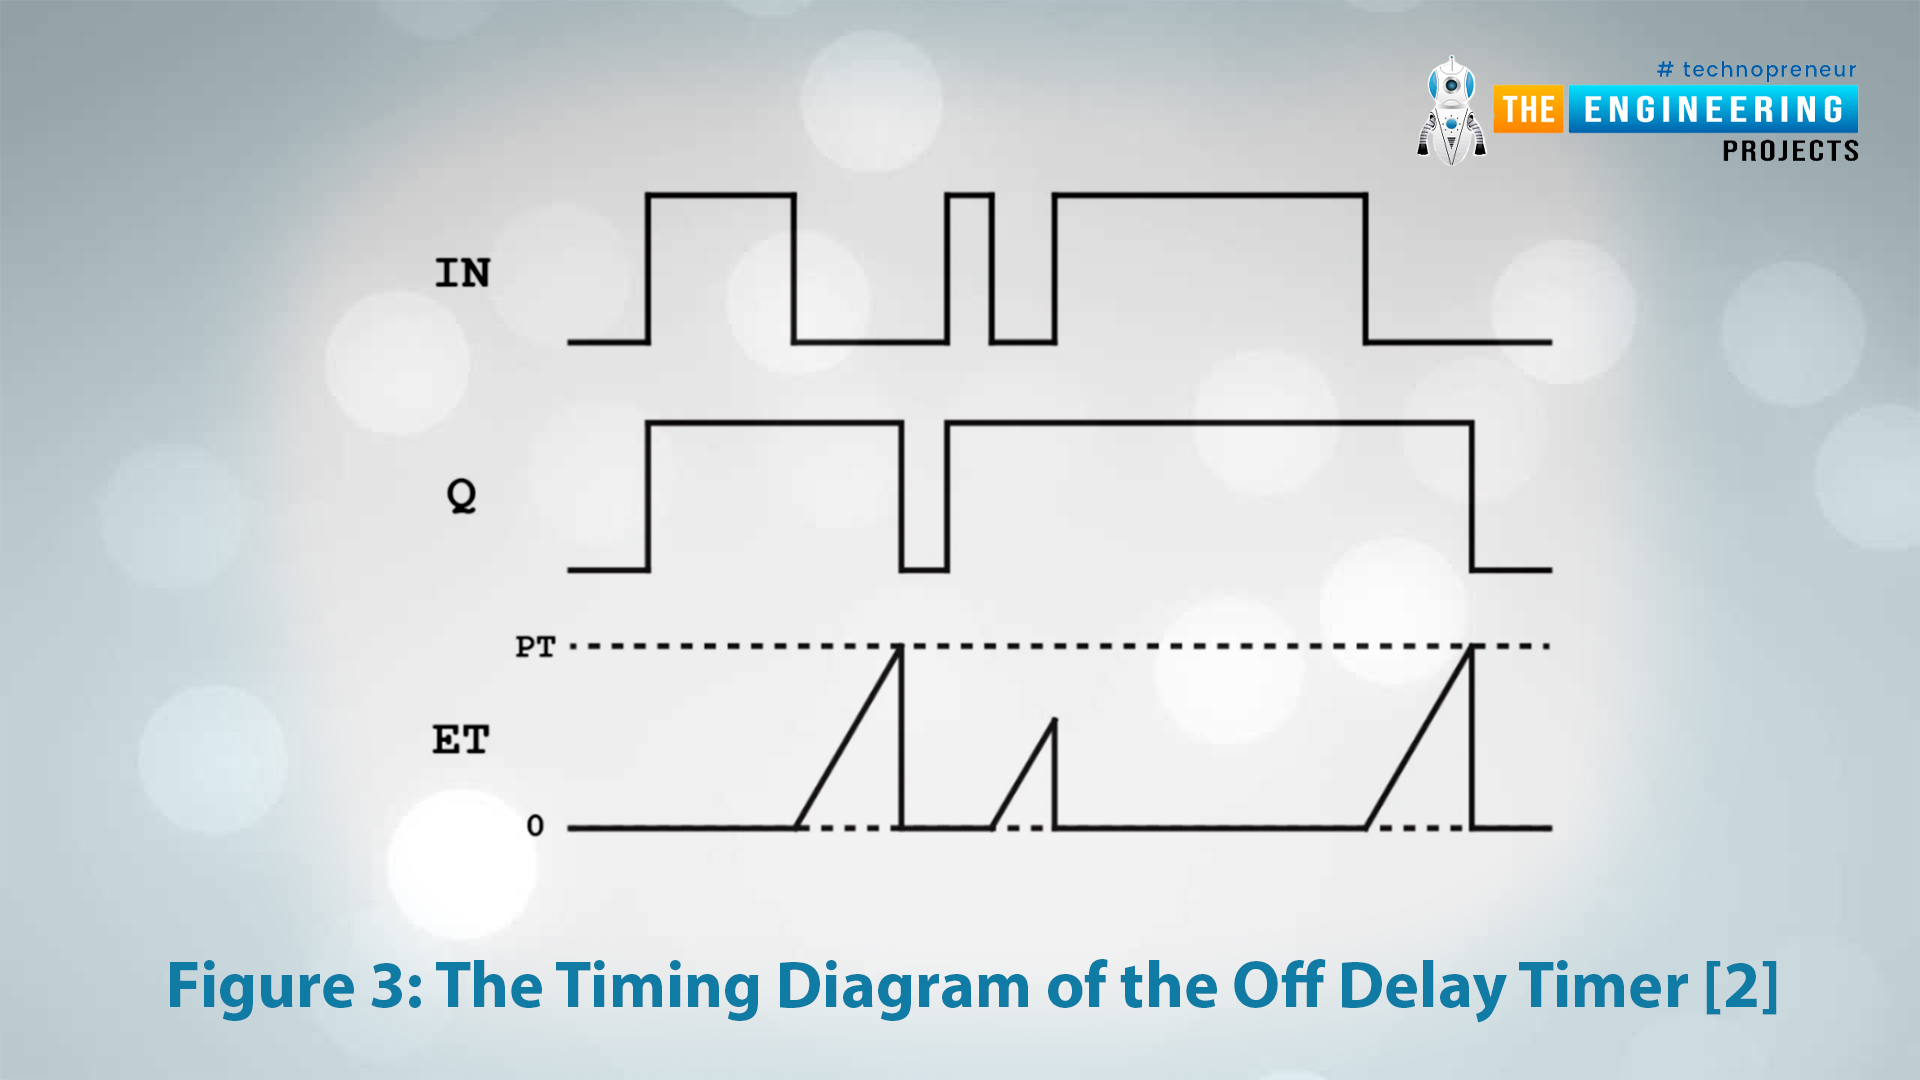 What are timers used for in industrial applications, How do timers work, The advantages of timers in PLC over that in relay timers, Timers type, ON-DELAY timer, OFF-DELAY timer, Pulse timer, Accumulative timer, Timers in PLC and ladder logic program, Generate ON delay timer instruction, ON-Delay example ladder program, OFF-Delay example ladder program, Pulse timer example